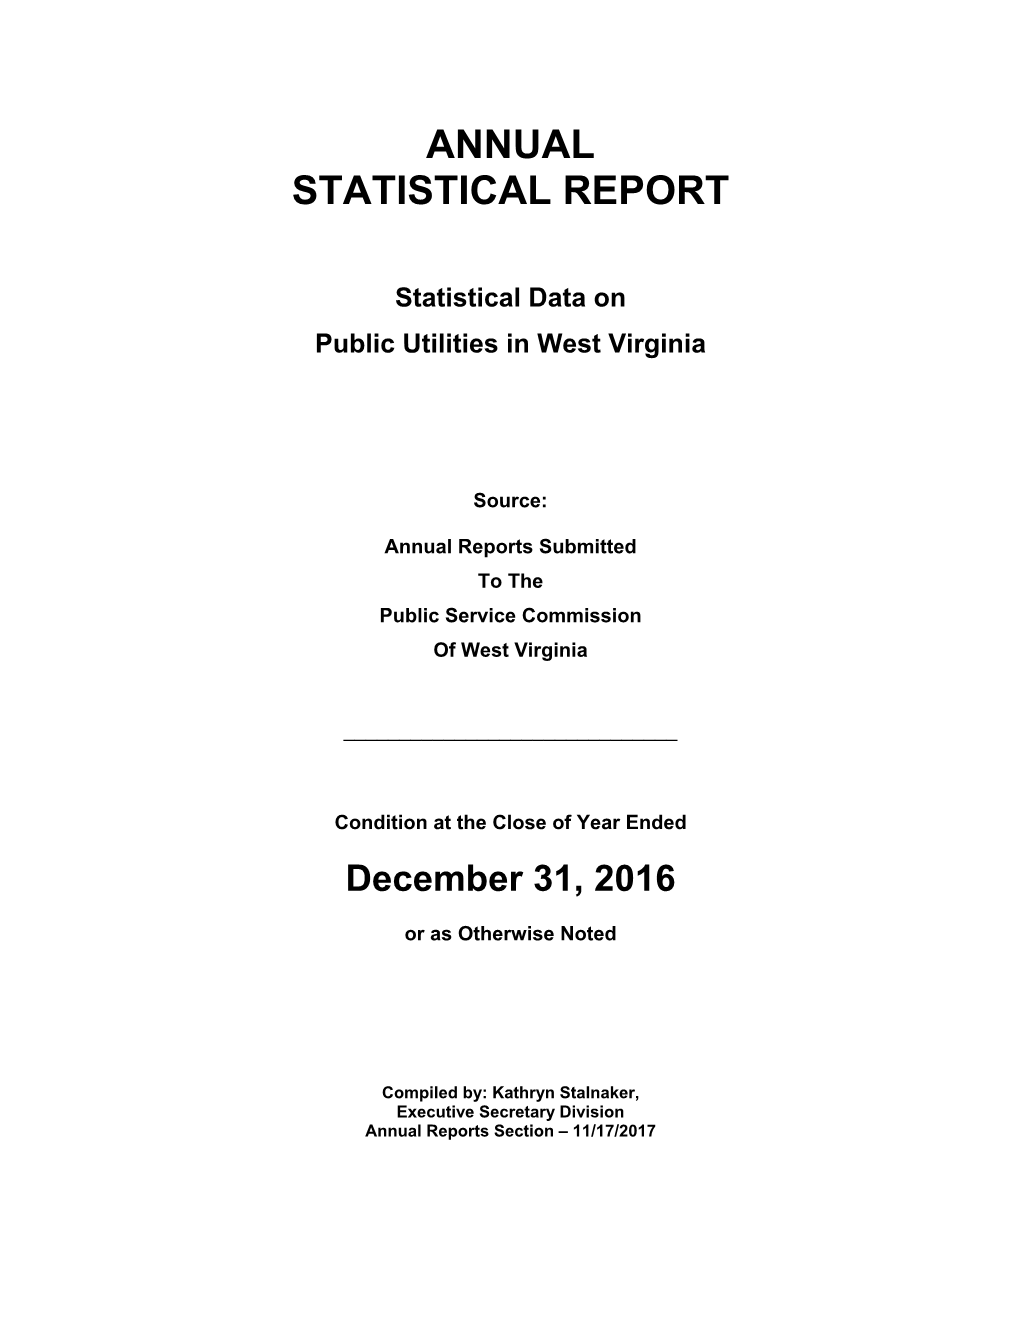 Annual Statistical Report for 2016